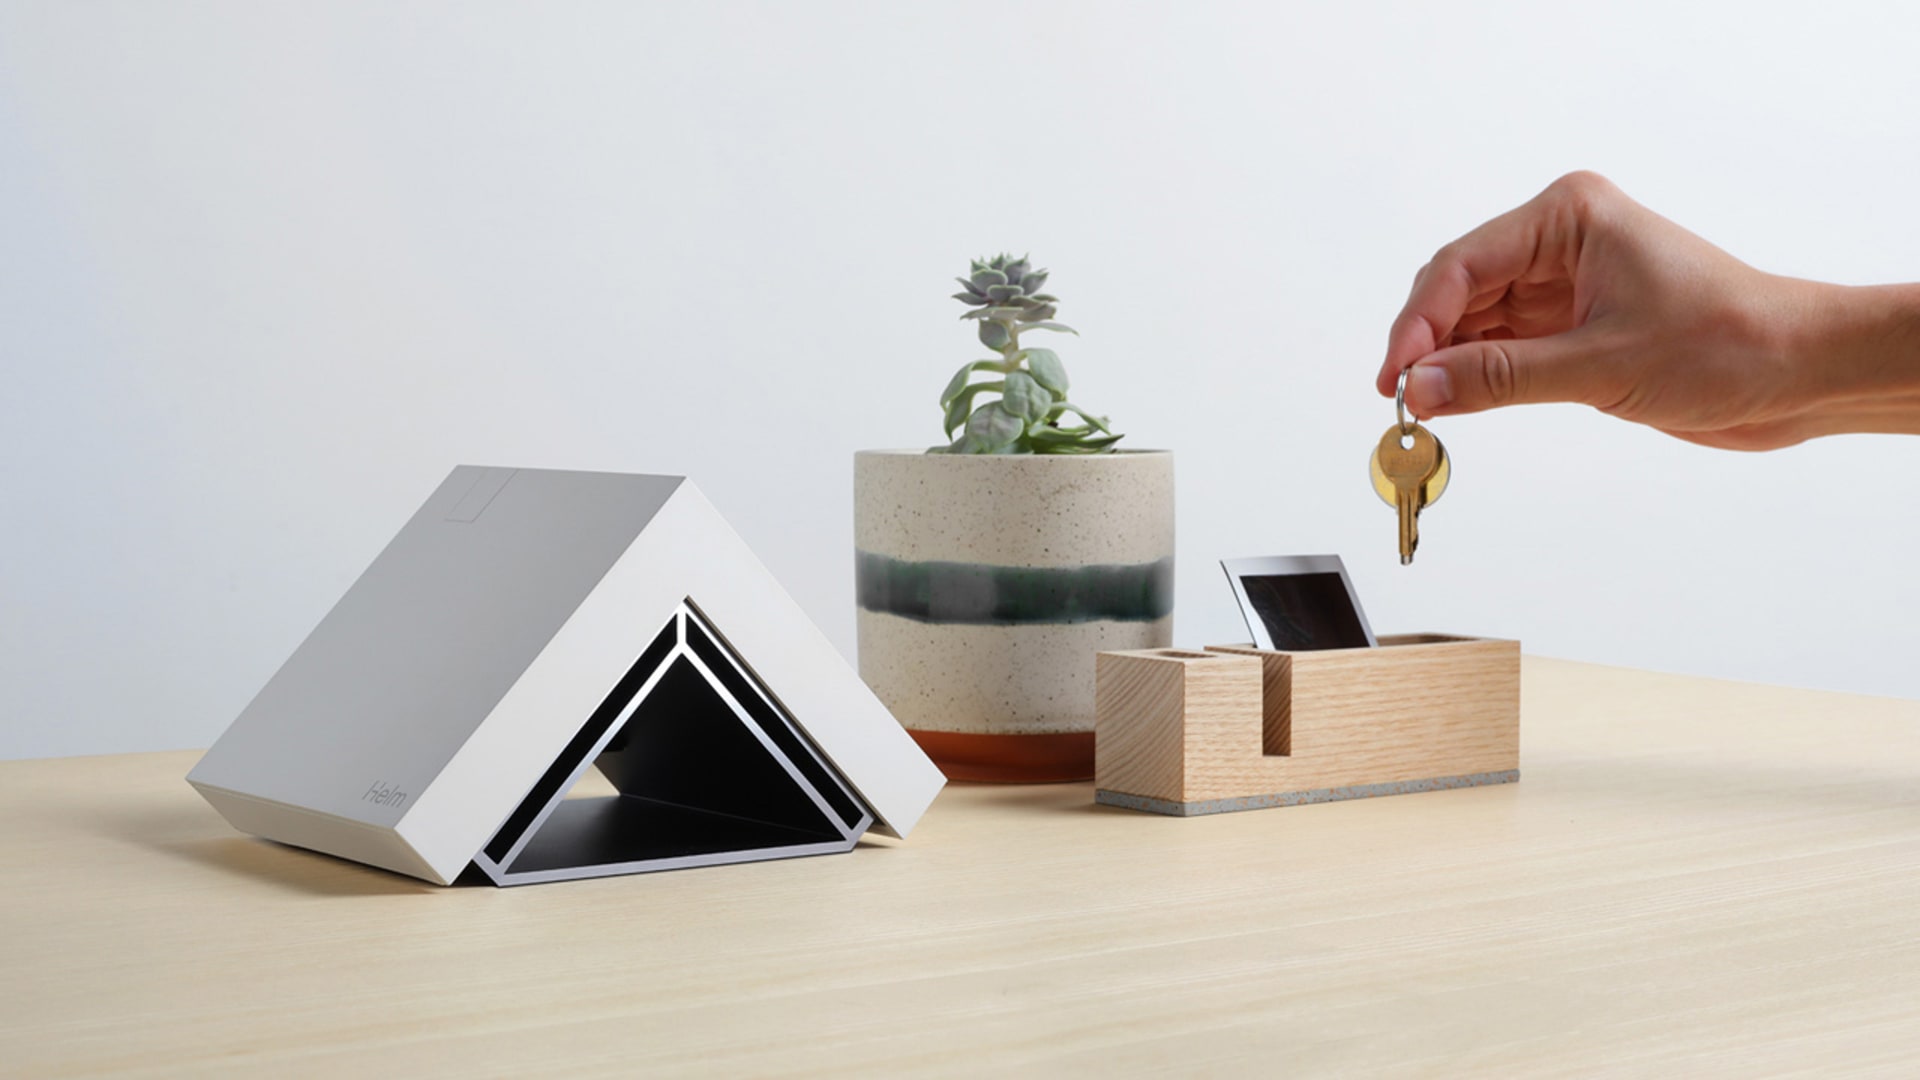 Beat the surveillance economy with this clever gadget